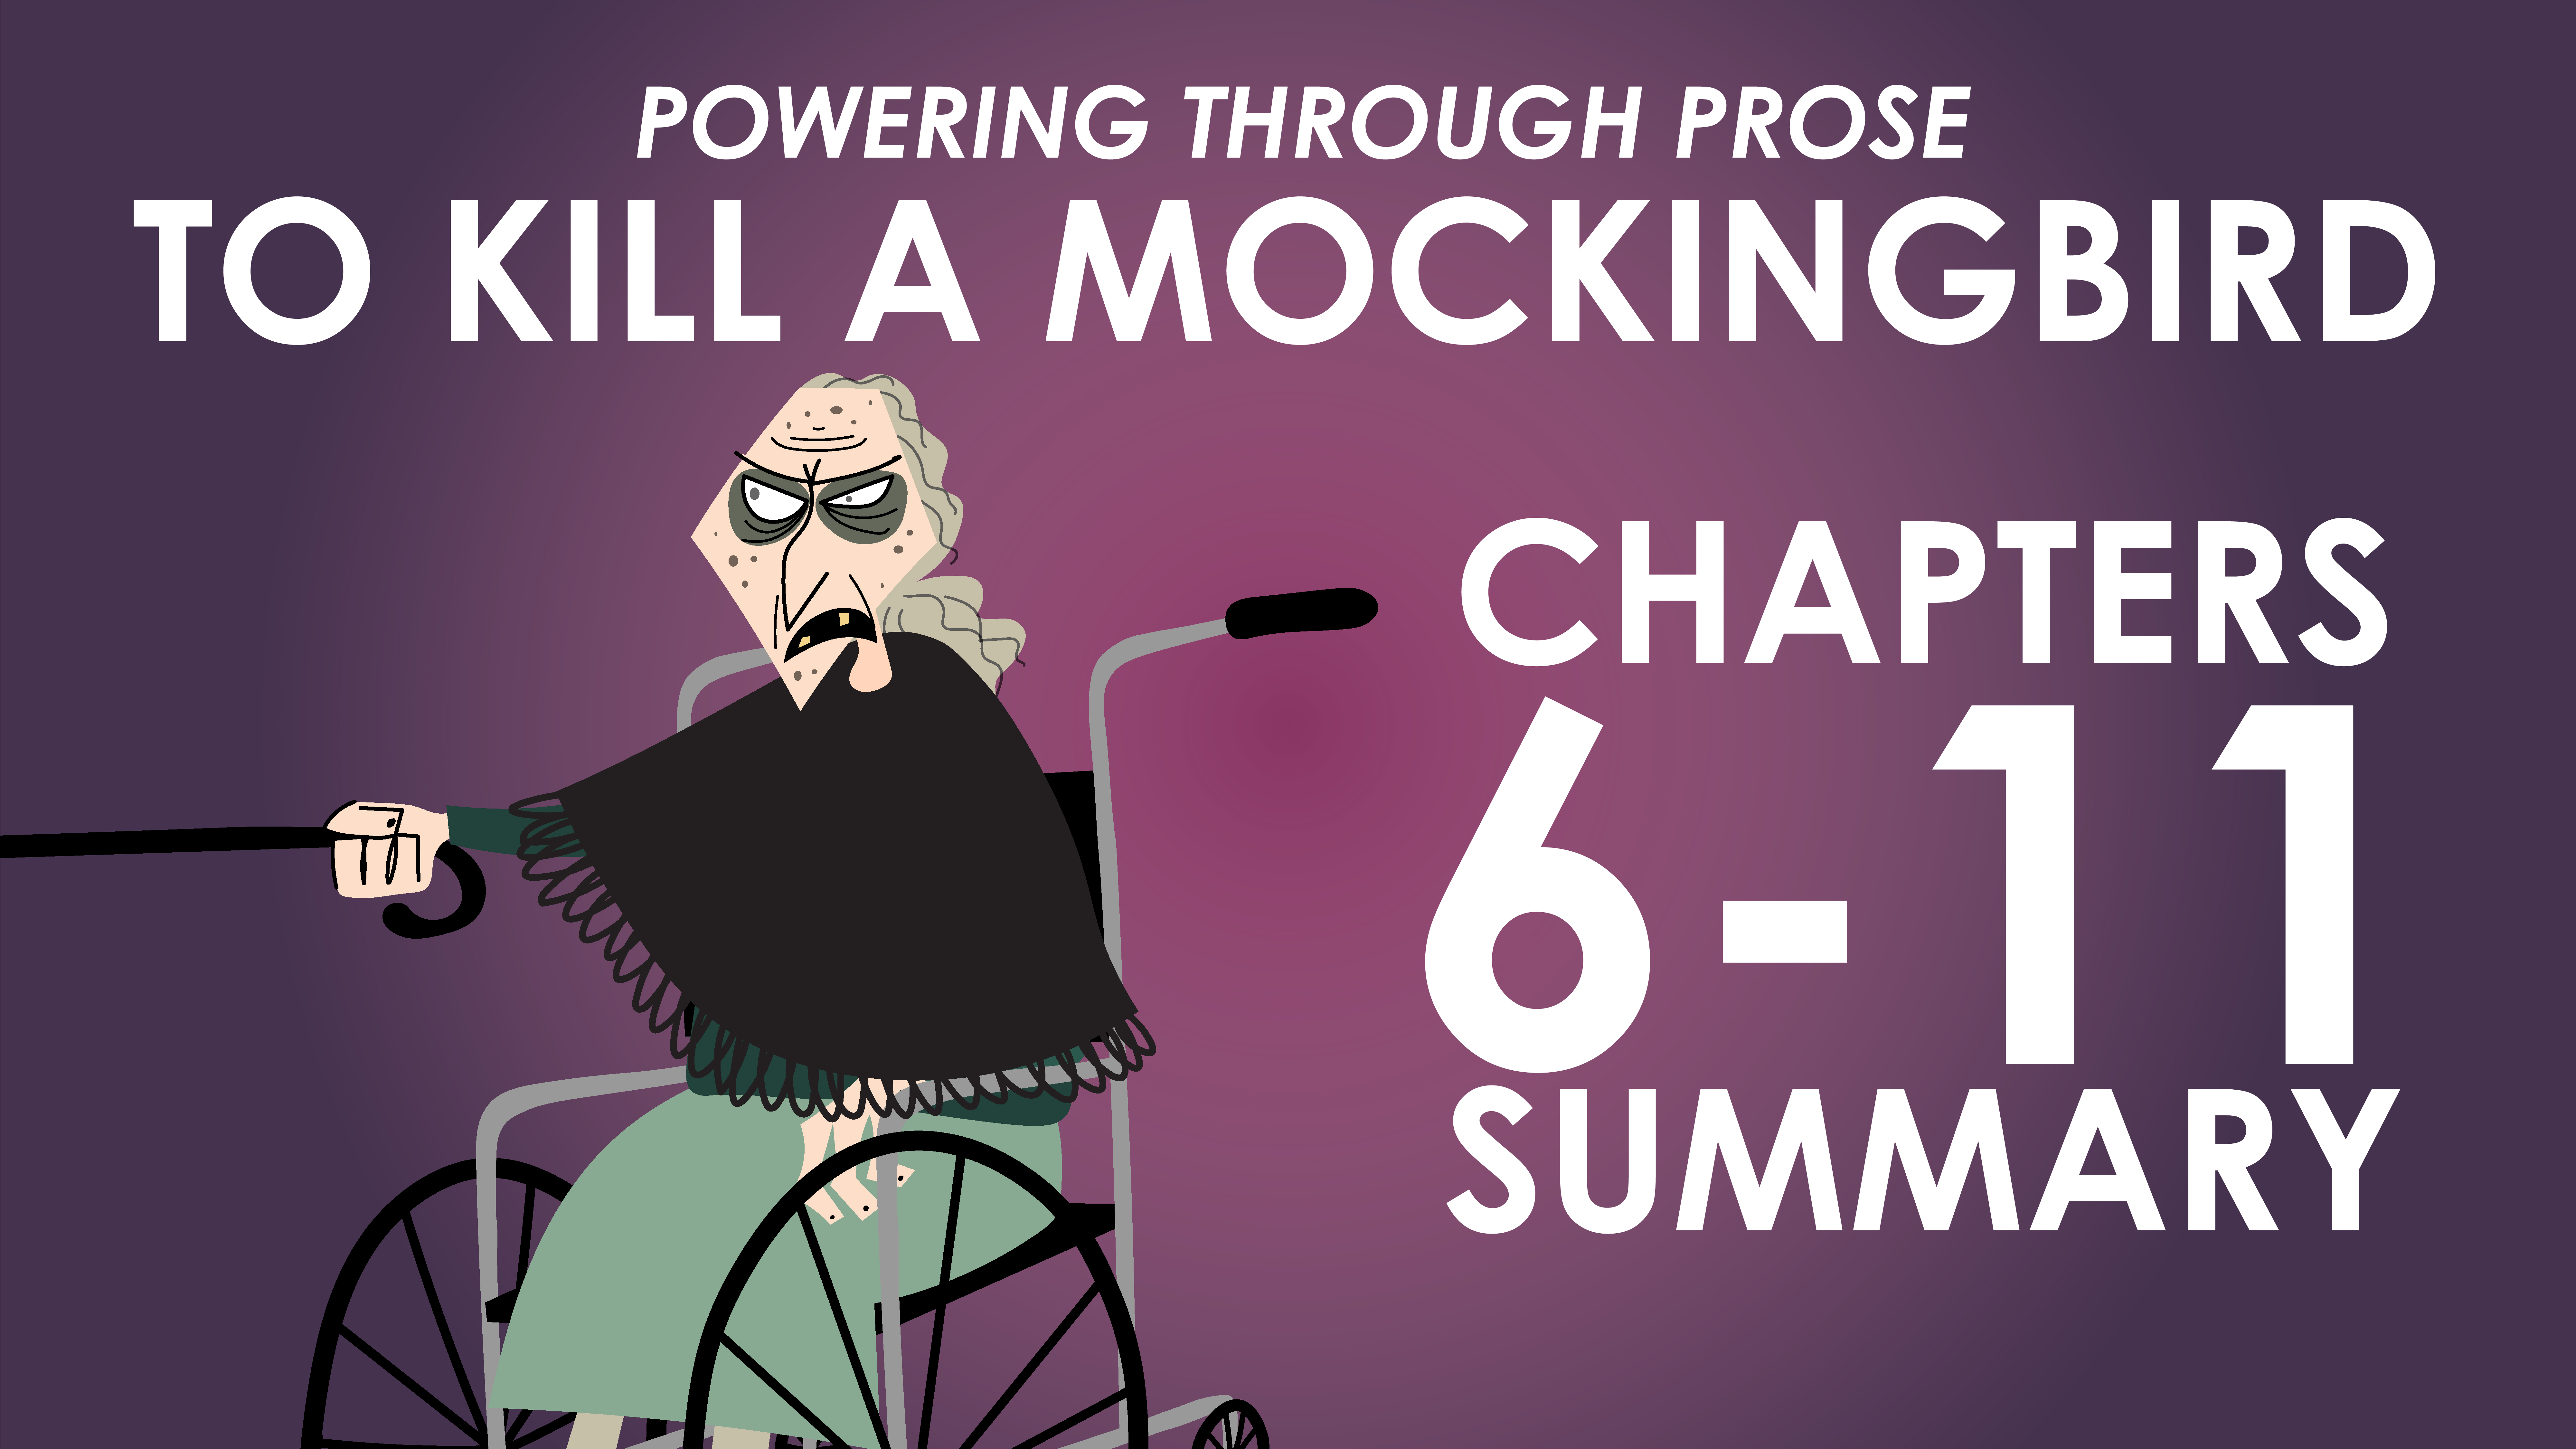 To Kill a Mockingbird - Harper Lee - Chapters 6-11 Summary - Powering Through Prose Series	